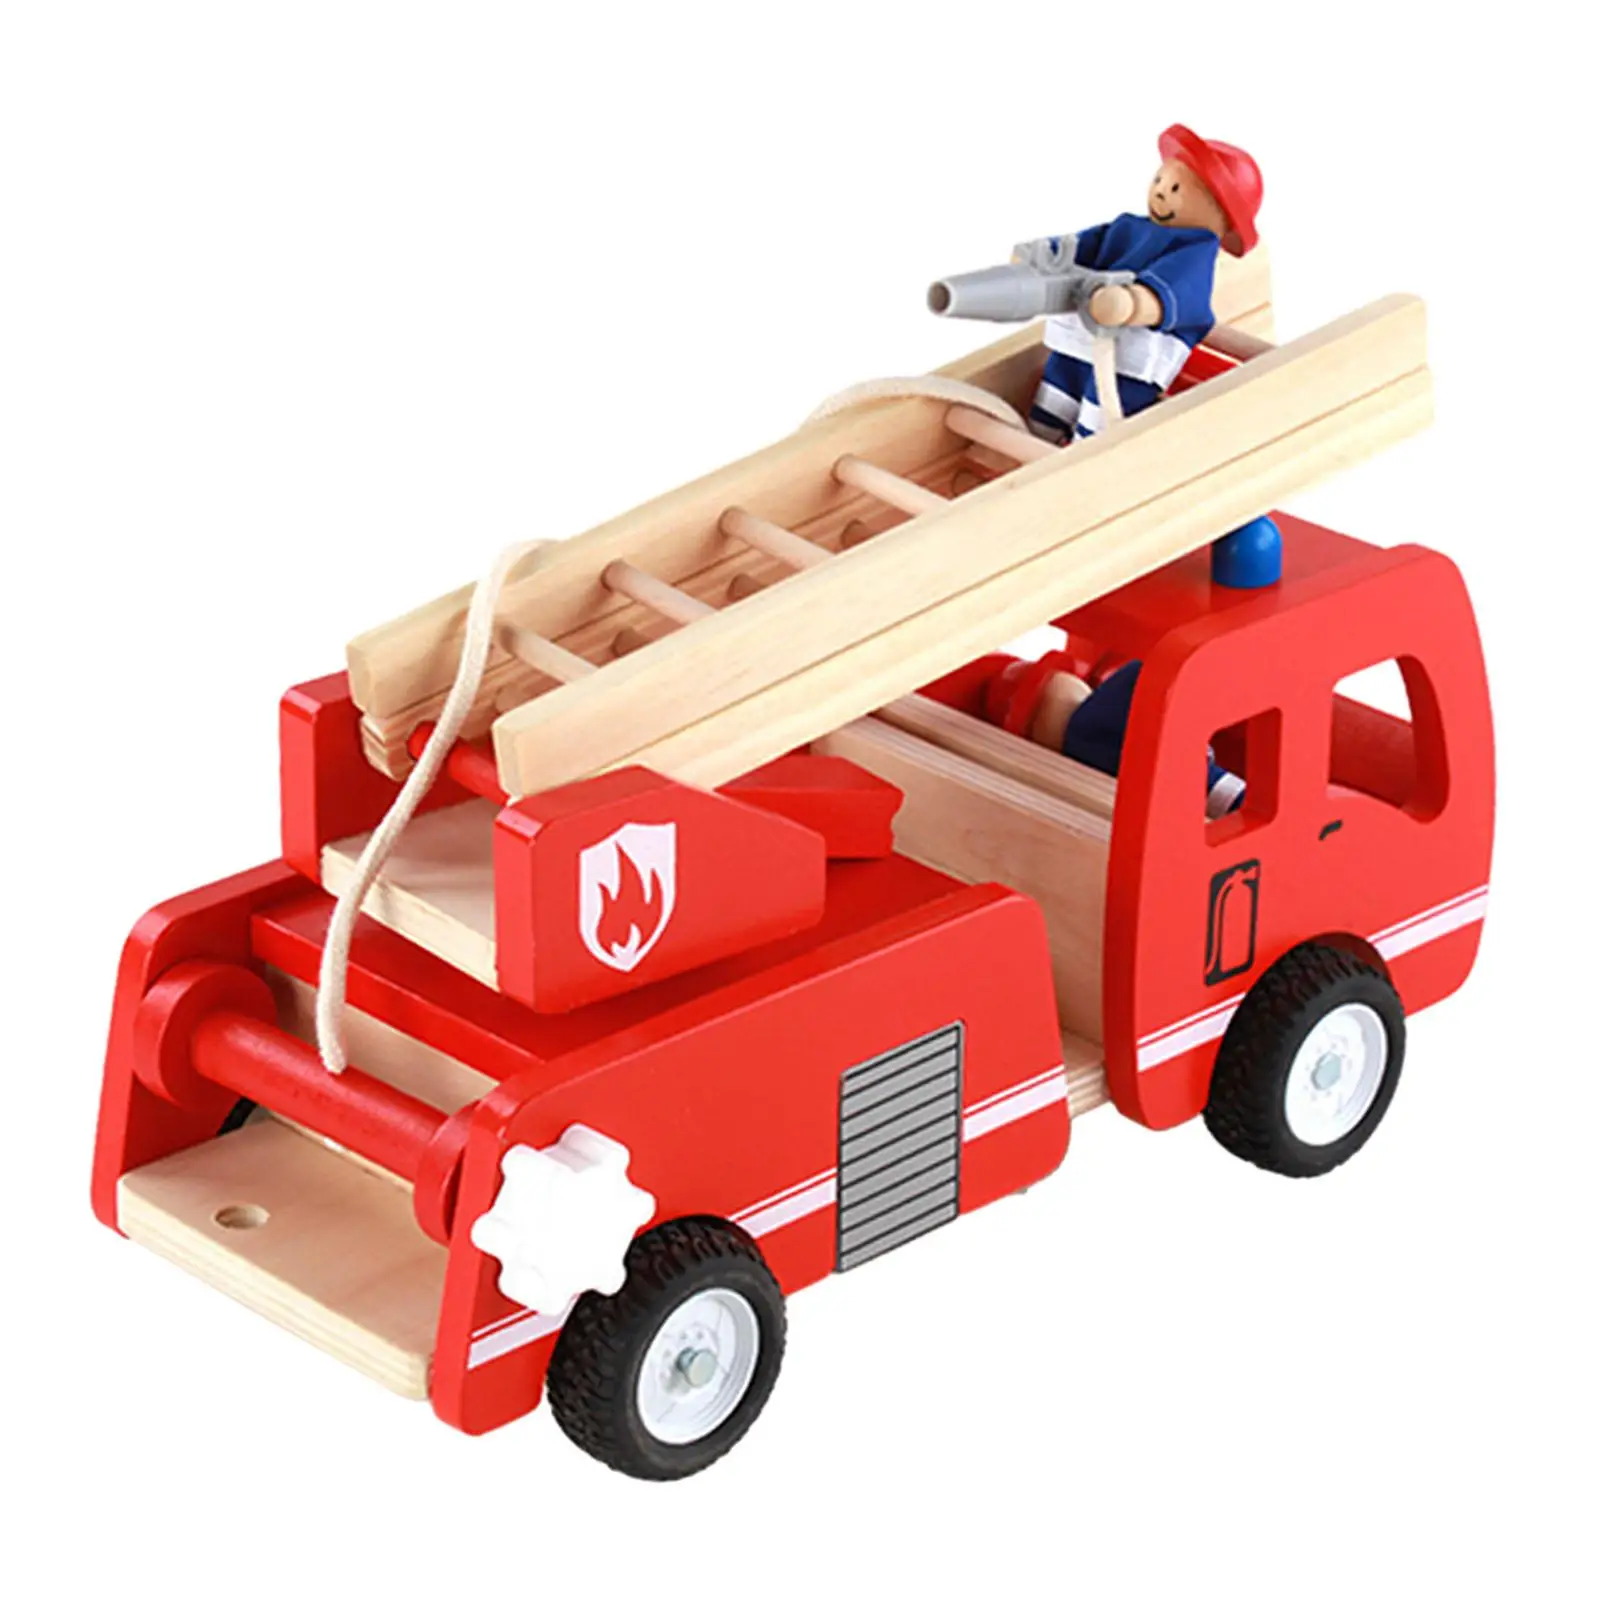 

Wooden Fire Truck Toy Role Play Fine Motor Skills Coordination Fire Engine Vehicle Toy Rotating Ladder Wood Fire Engine Toy